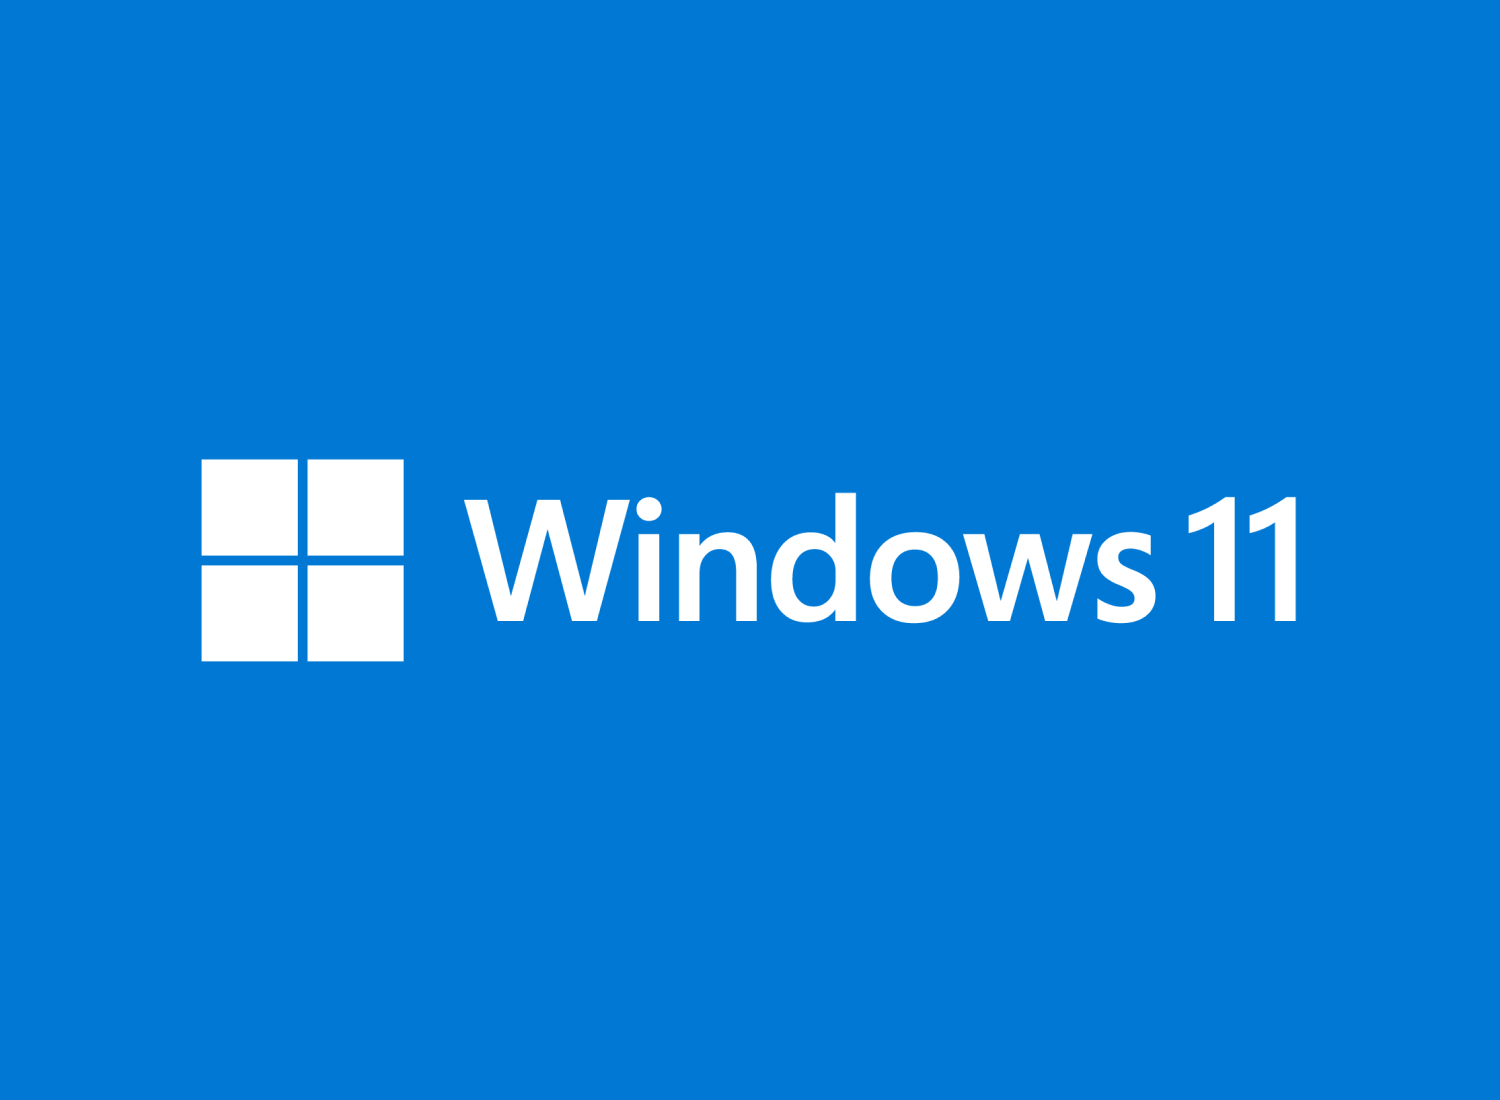 How to get the Windows 10 November 2021 Update